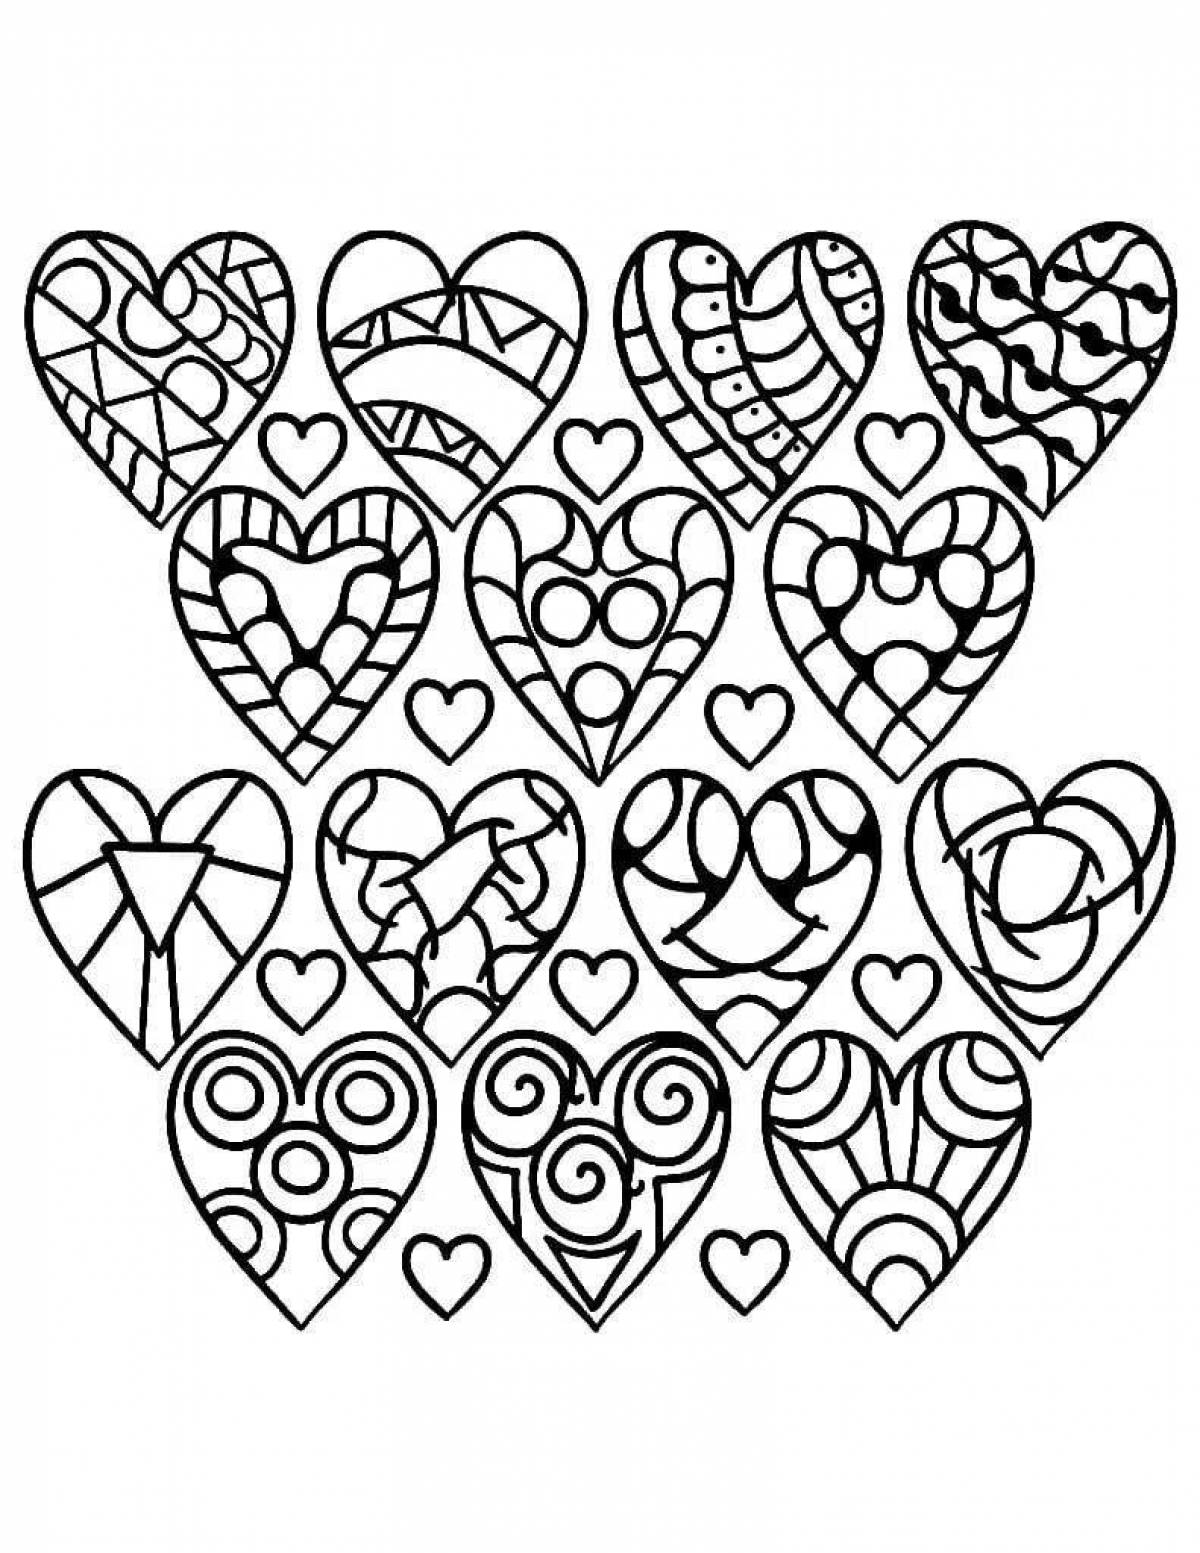 Coloring page unusual heart